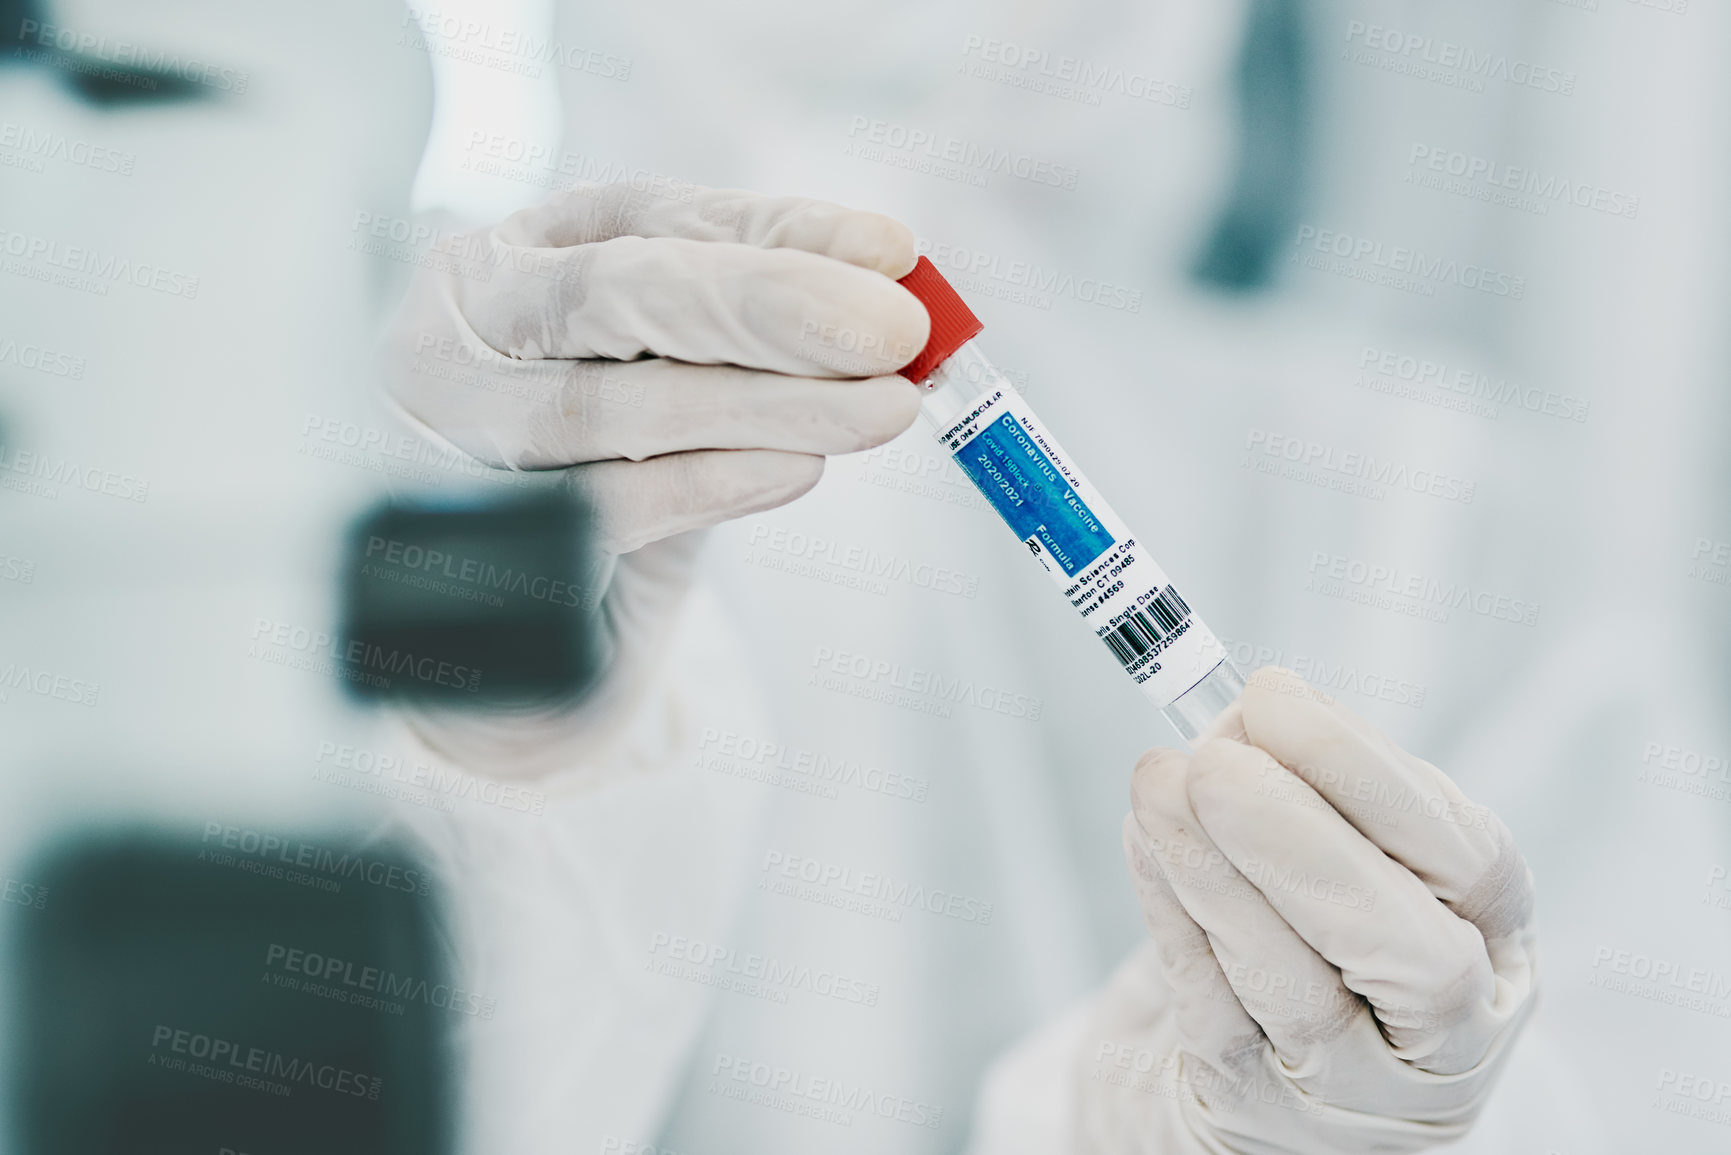 Buy stock photo Cropped shot of a scientist holding a vial while conducting medical research in a laboratory